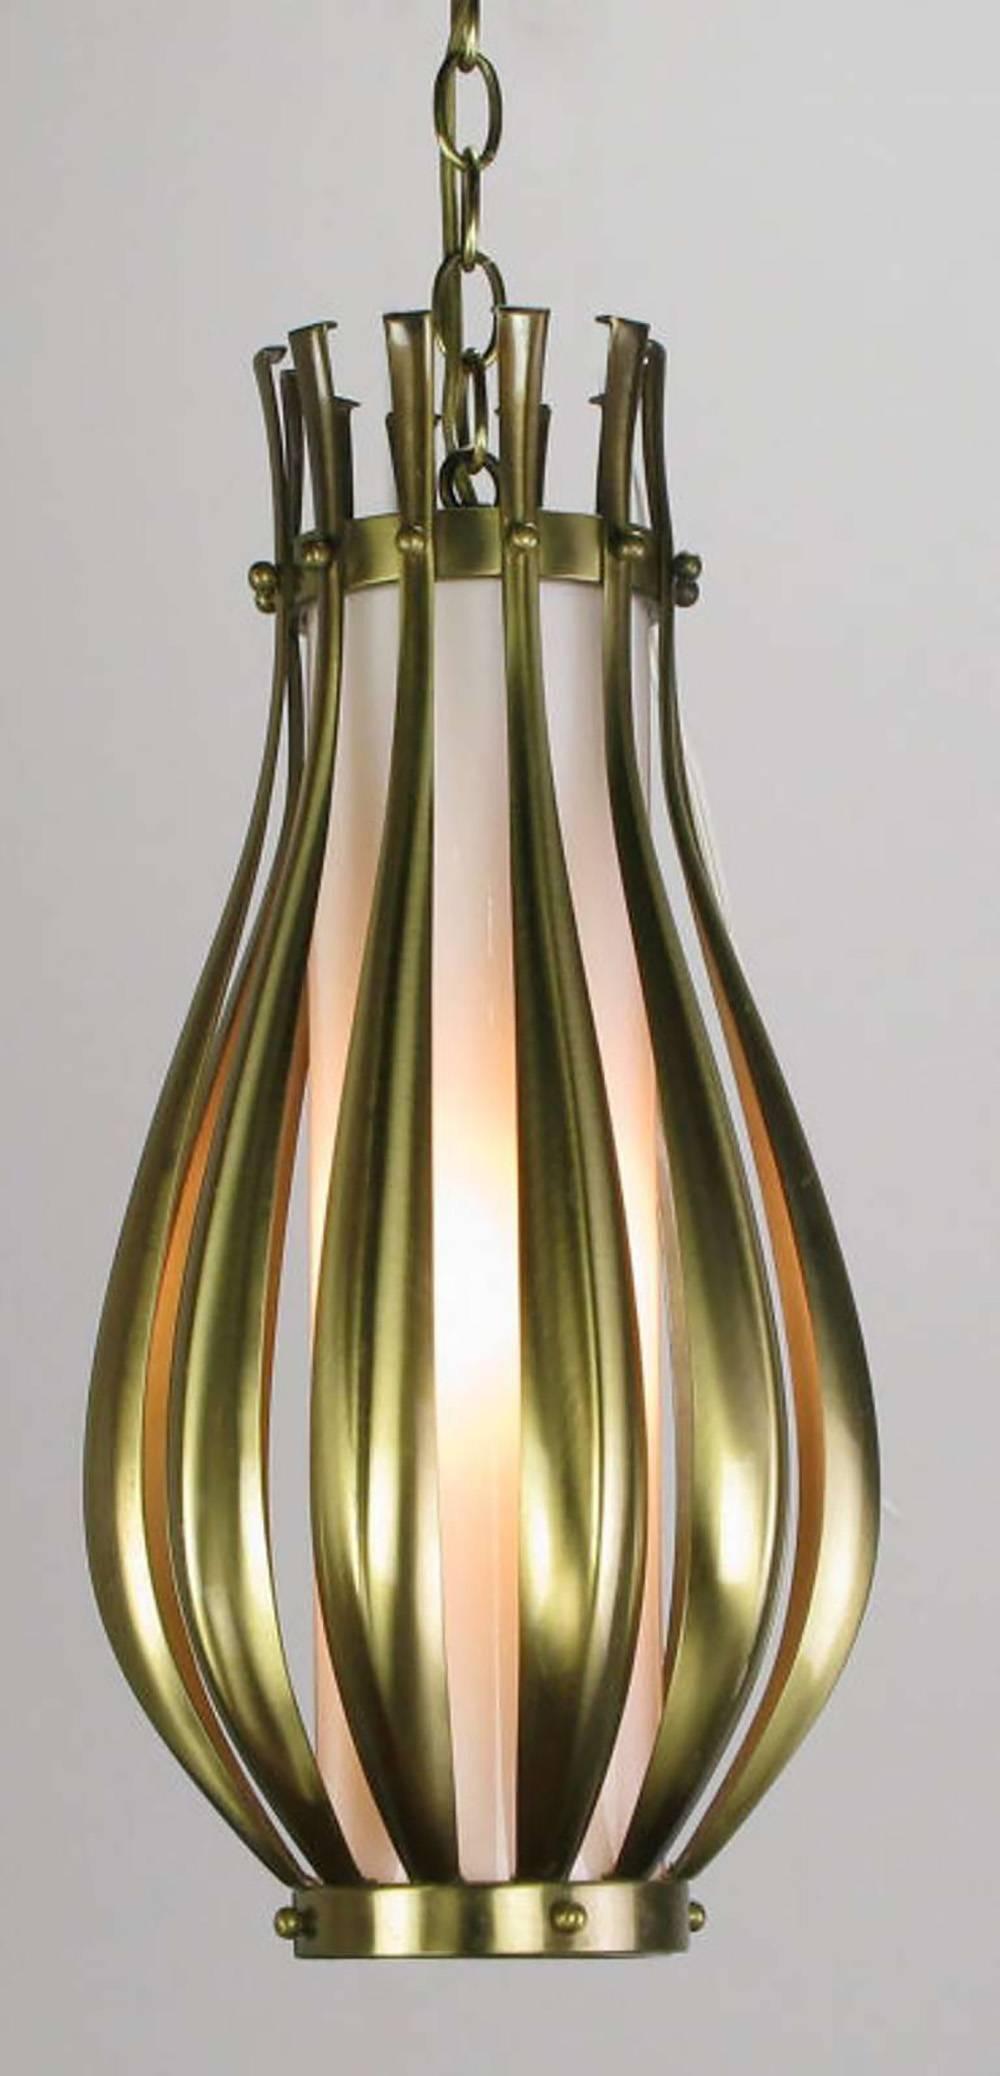 Ribbed and brushed brass gourd form pendant hanging light fixture, with a milk glass internal shade. Detailed with brushed brass balls. Similar to some designs by Gerald Thurston for Lightolier. Single socket incandescent lighting element. Comes